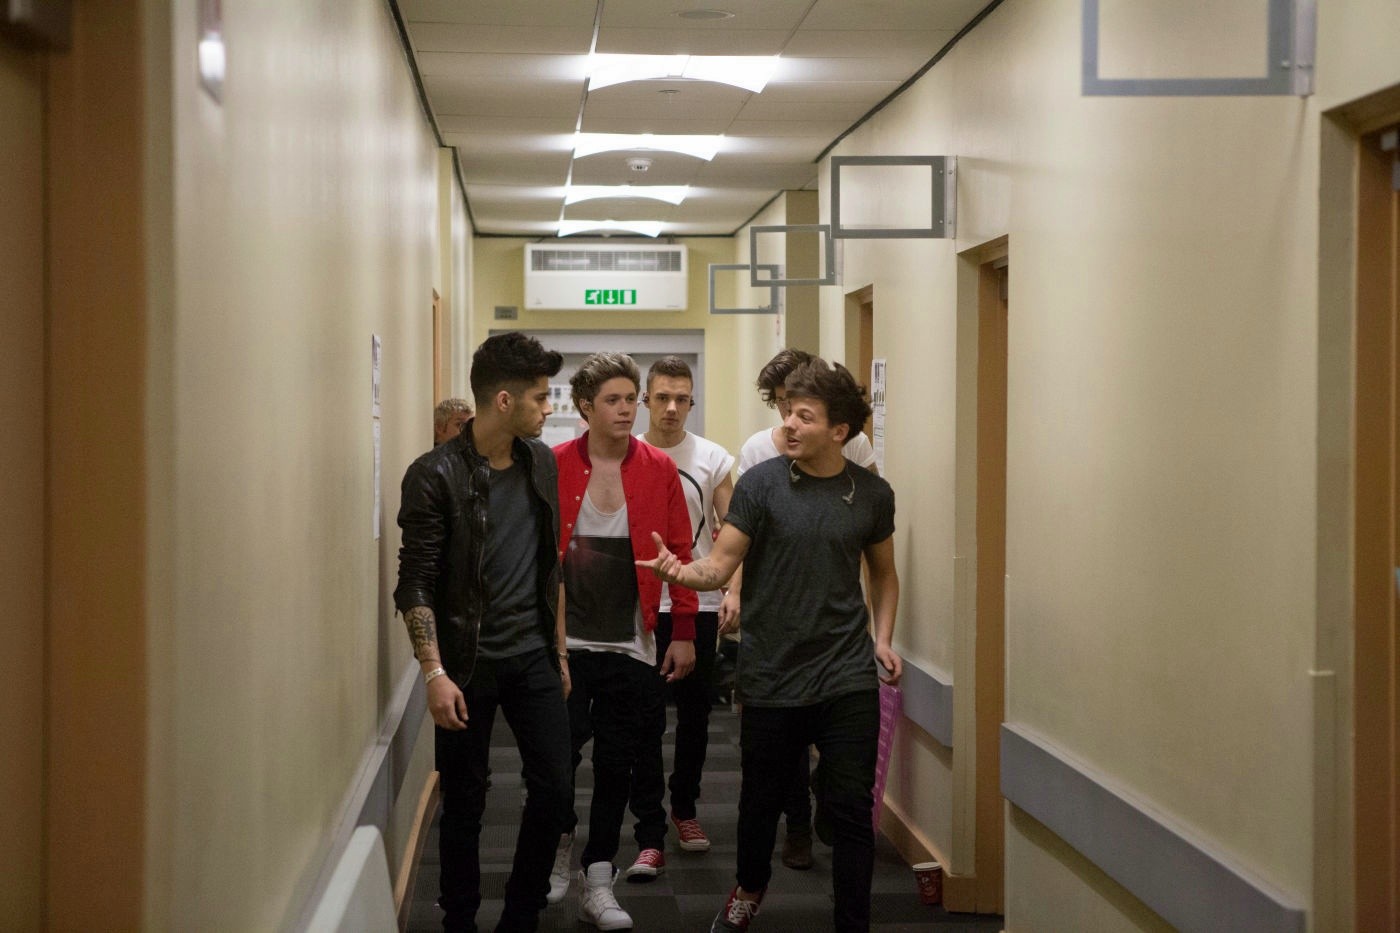 Zayn Malik, Niall Horan, Liam Payne and Louis Tomlinson in TriStar Pictures' One Direction: This Is Us (2013)